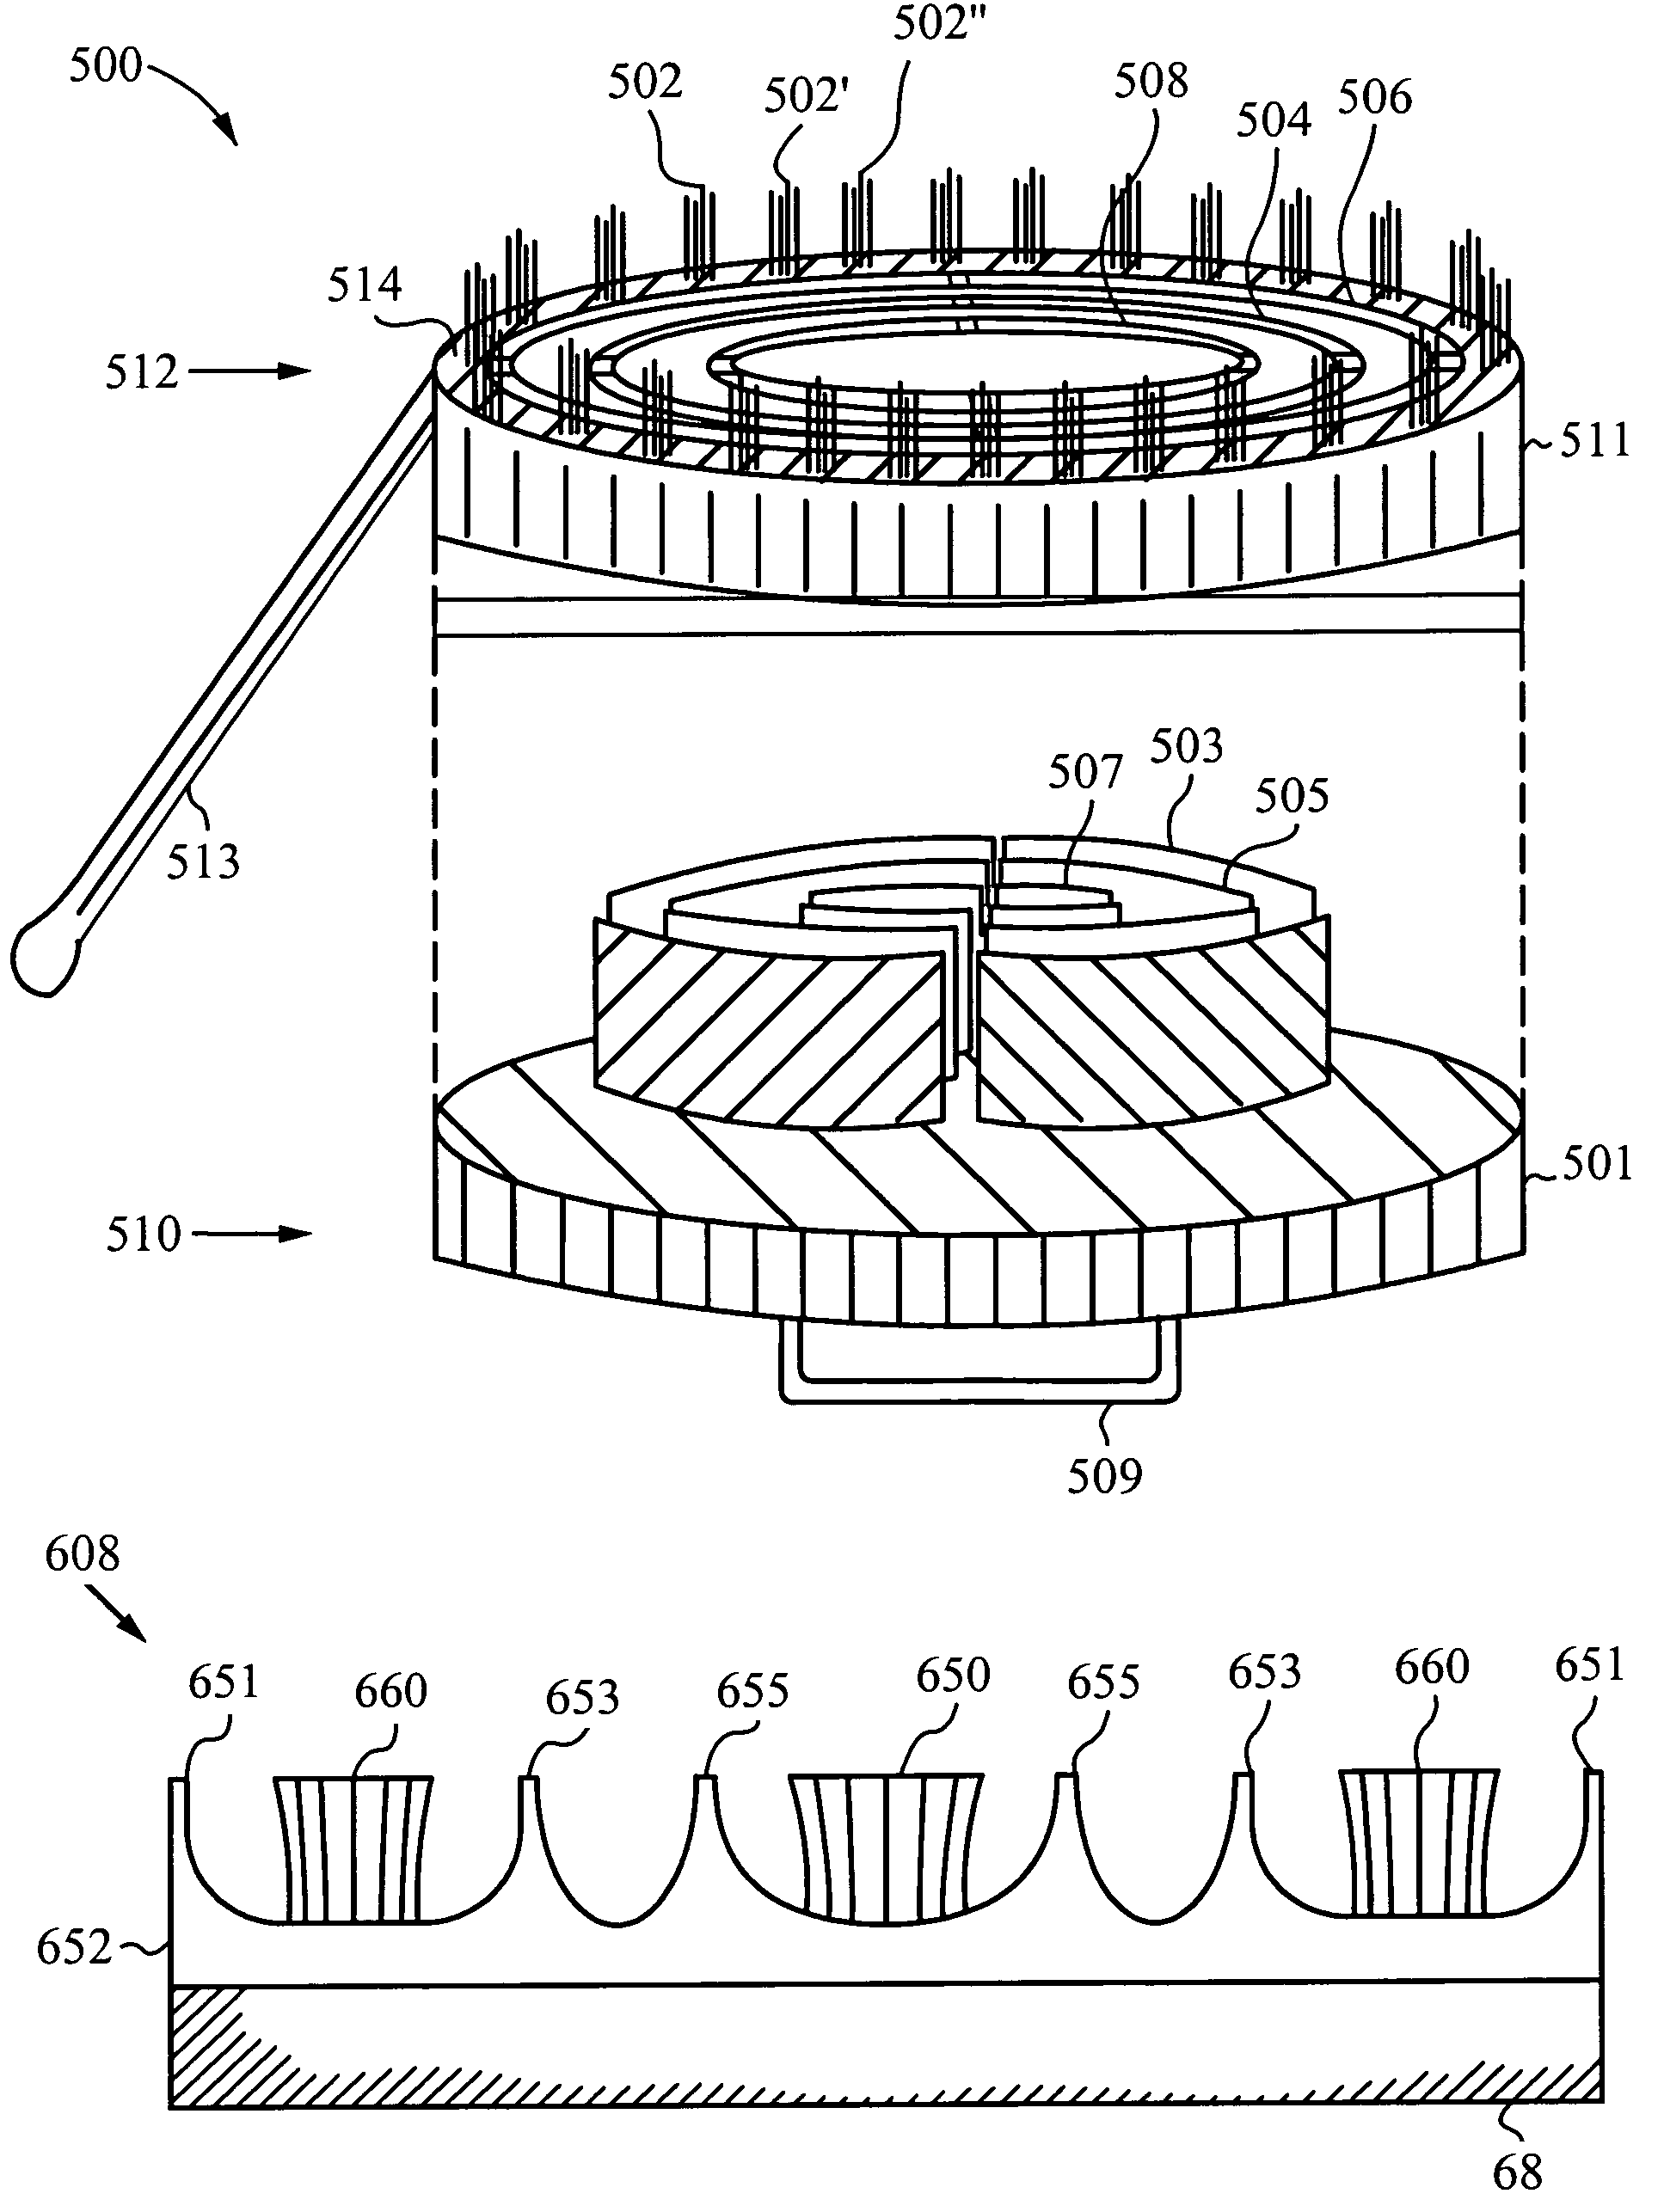 Squeegee device and system